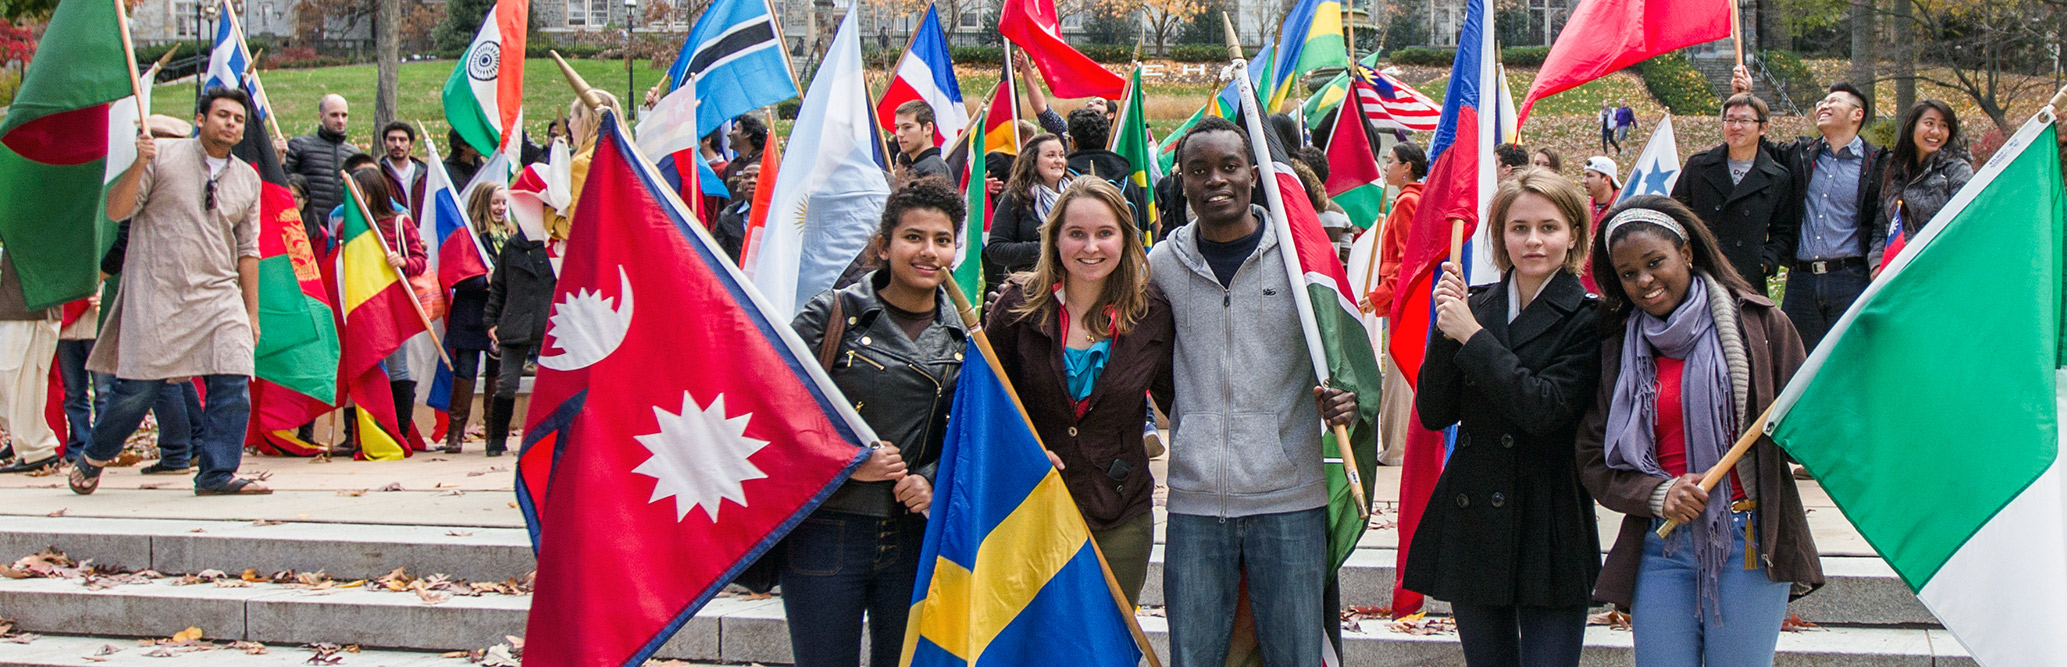 Students in a flag parade